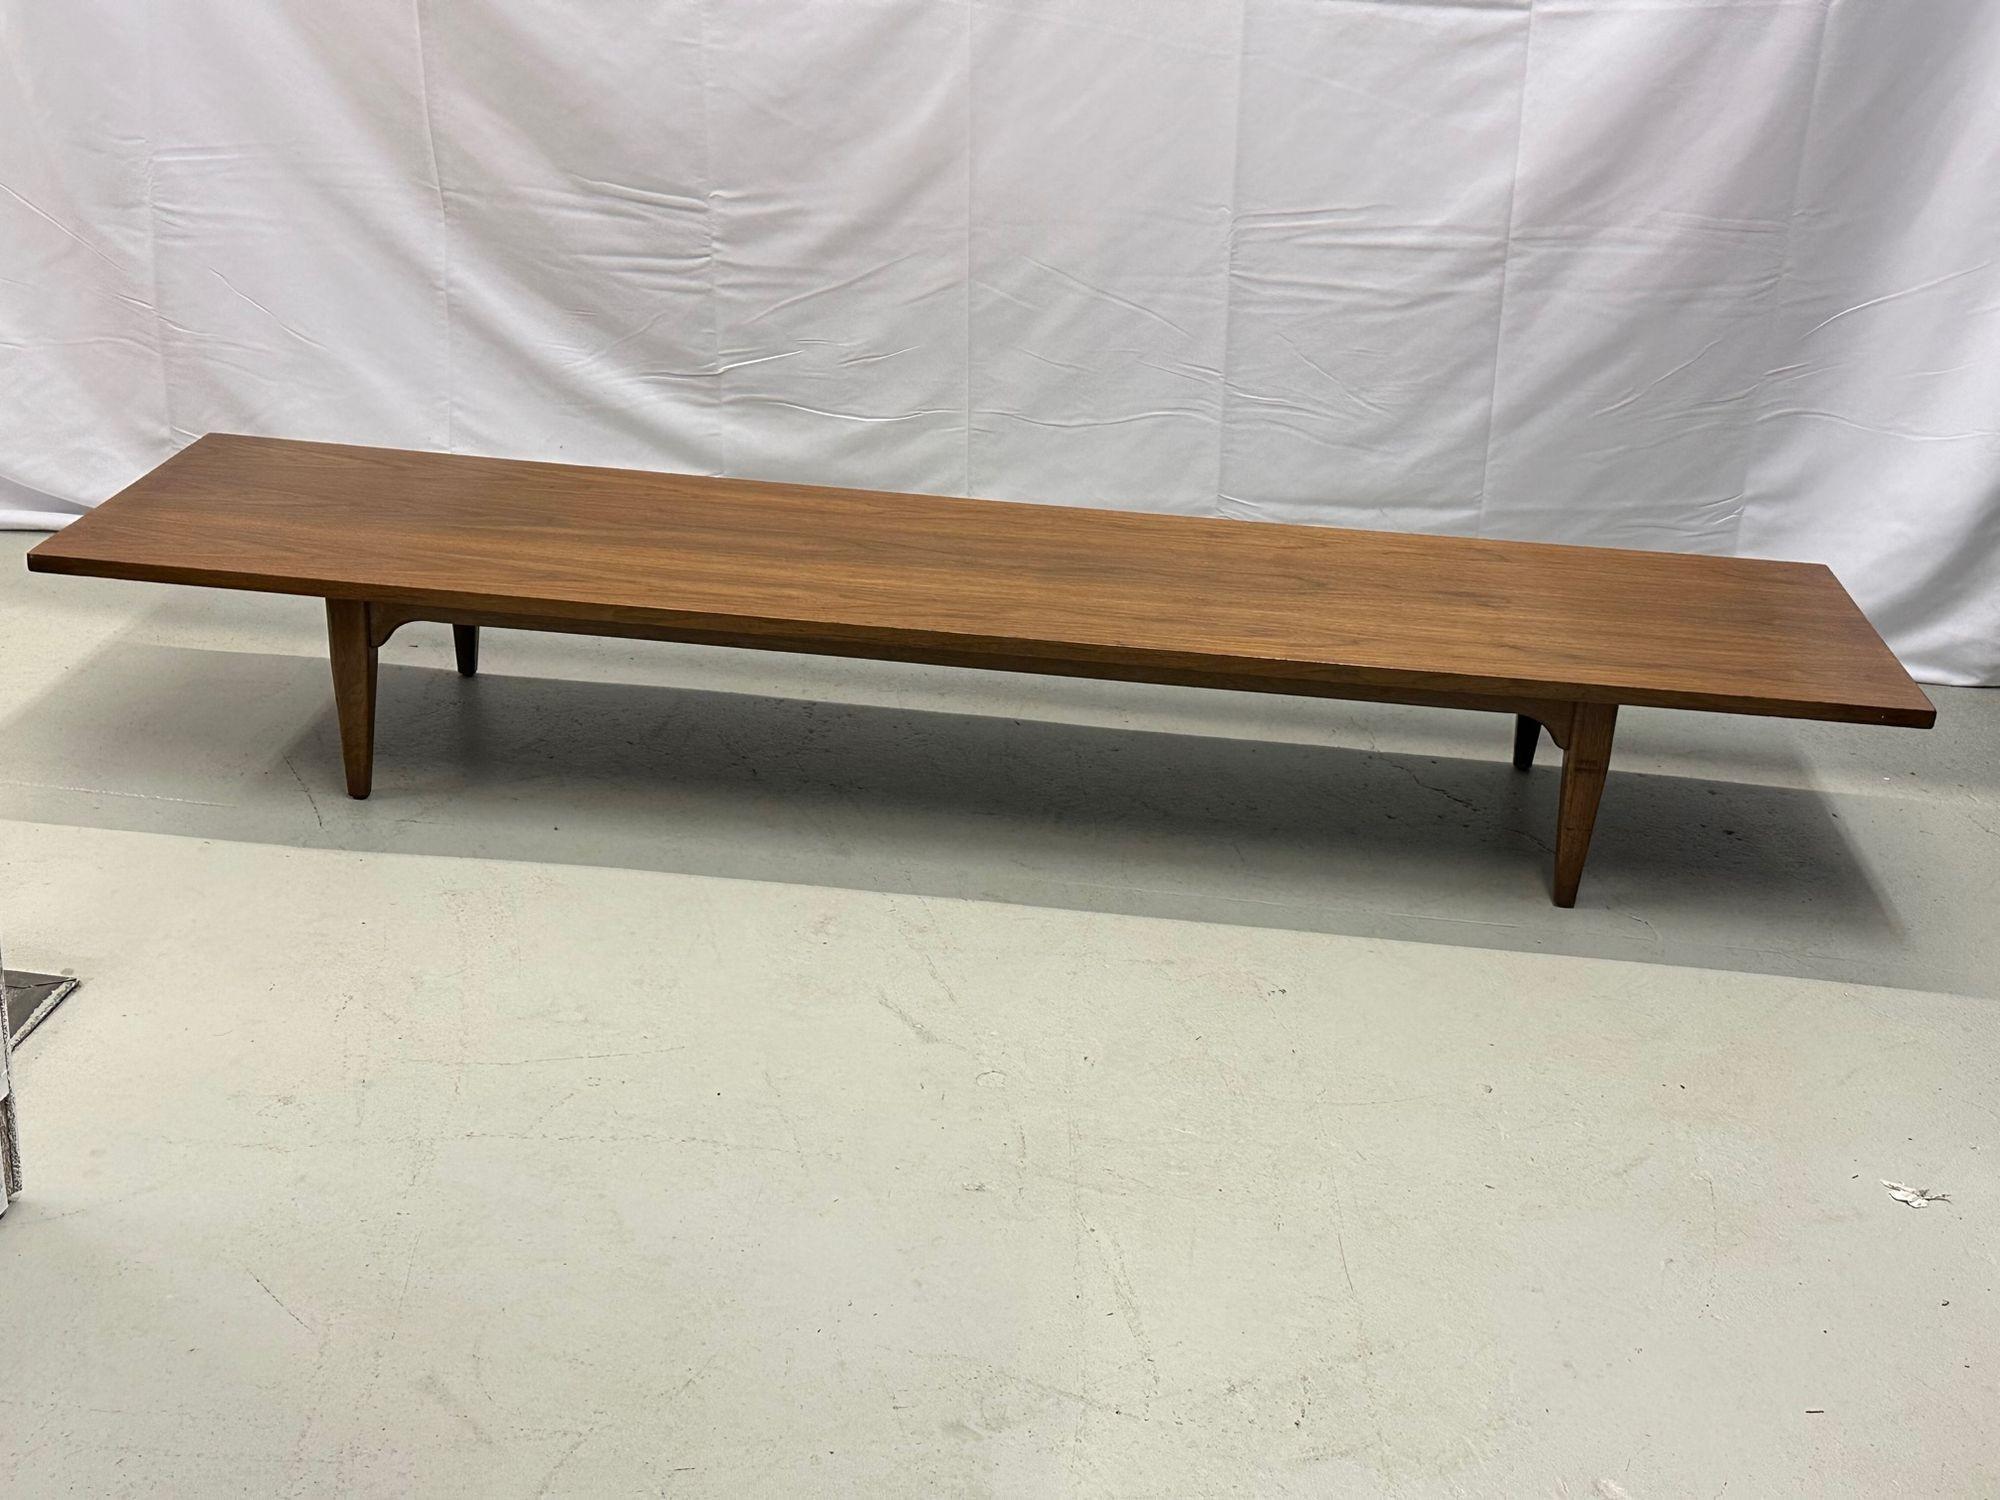 Danish Mid-Century Modern Cocktail or Coffee Table, 1950s, Solid Teak For Sale 4